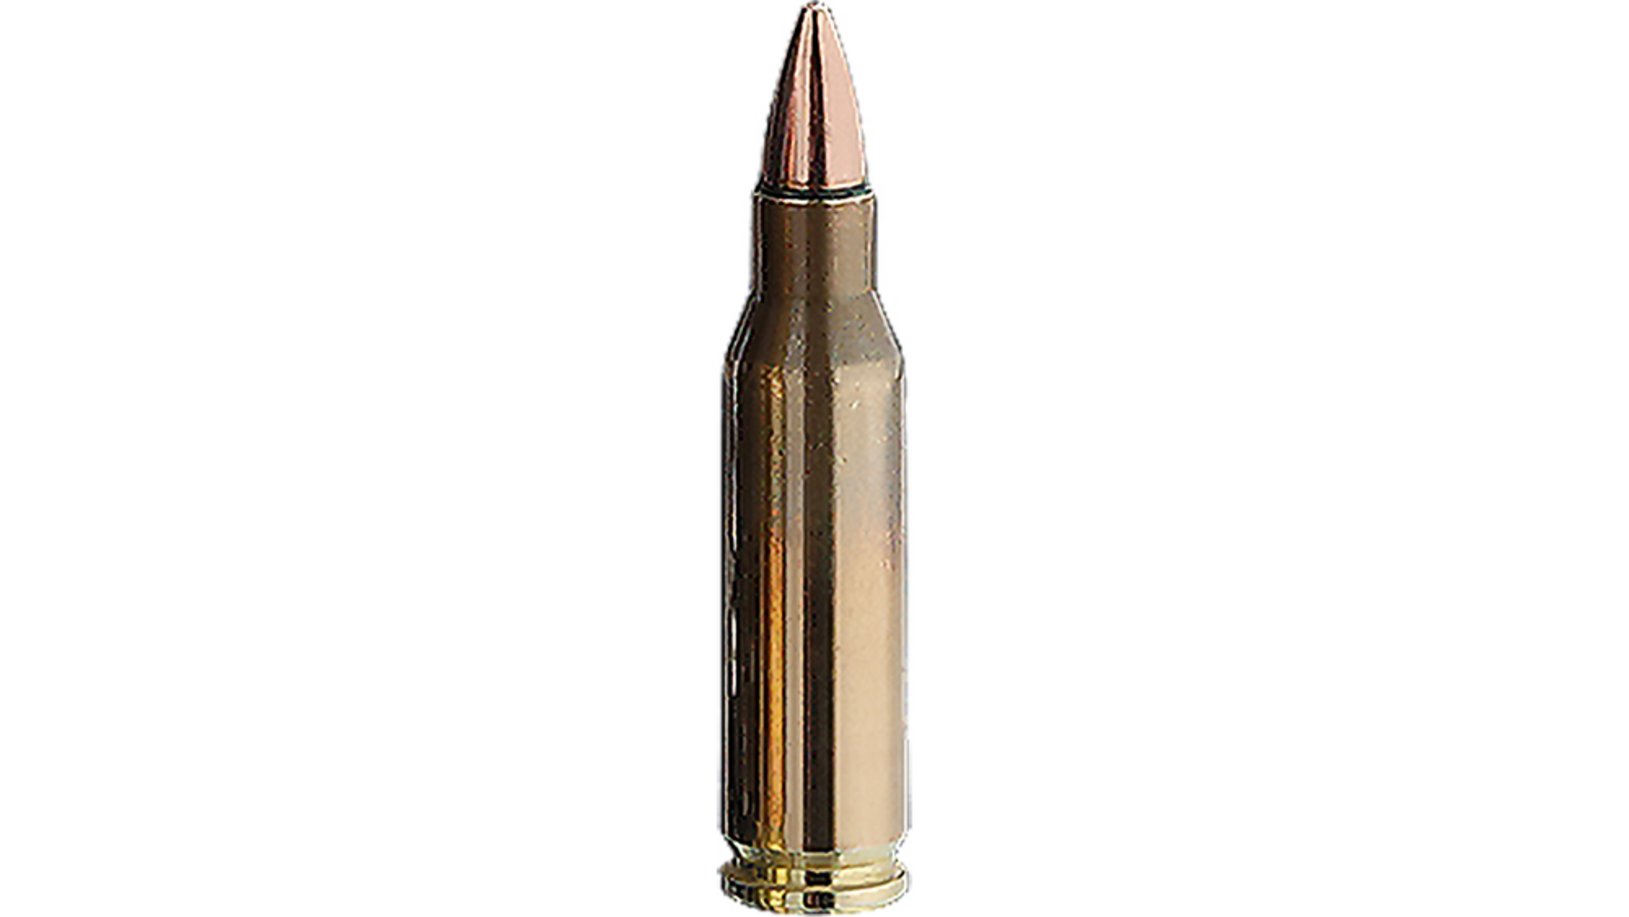 Single bullet view of GECO 4,6x30 TARGET FMJ 2,6g